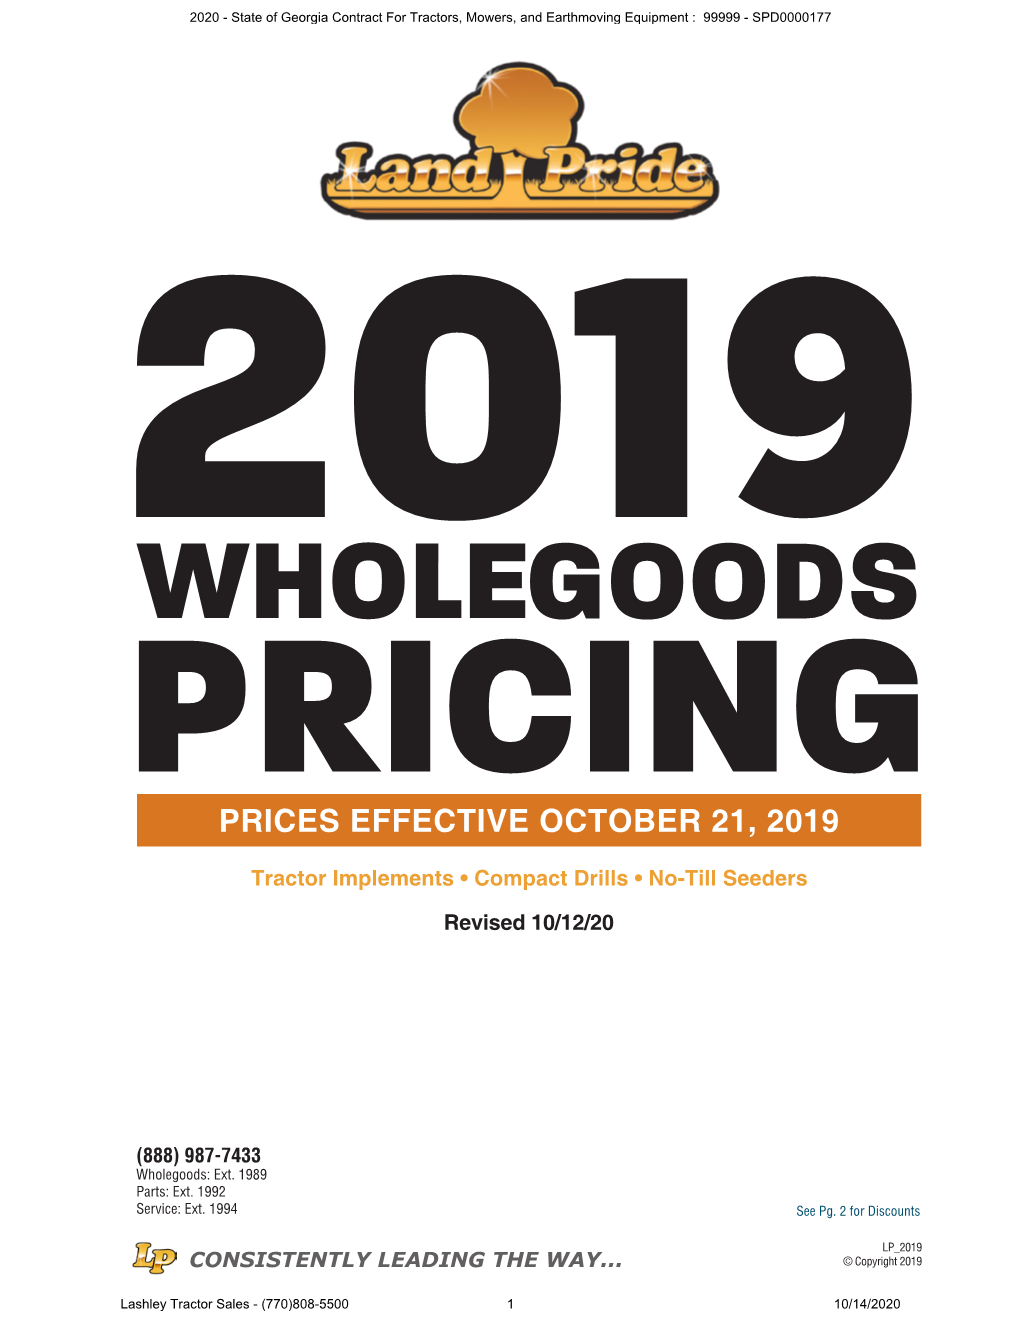 Prices Effective October 21, 2019